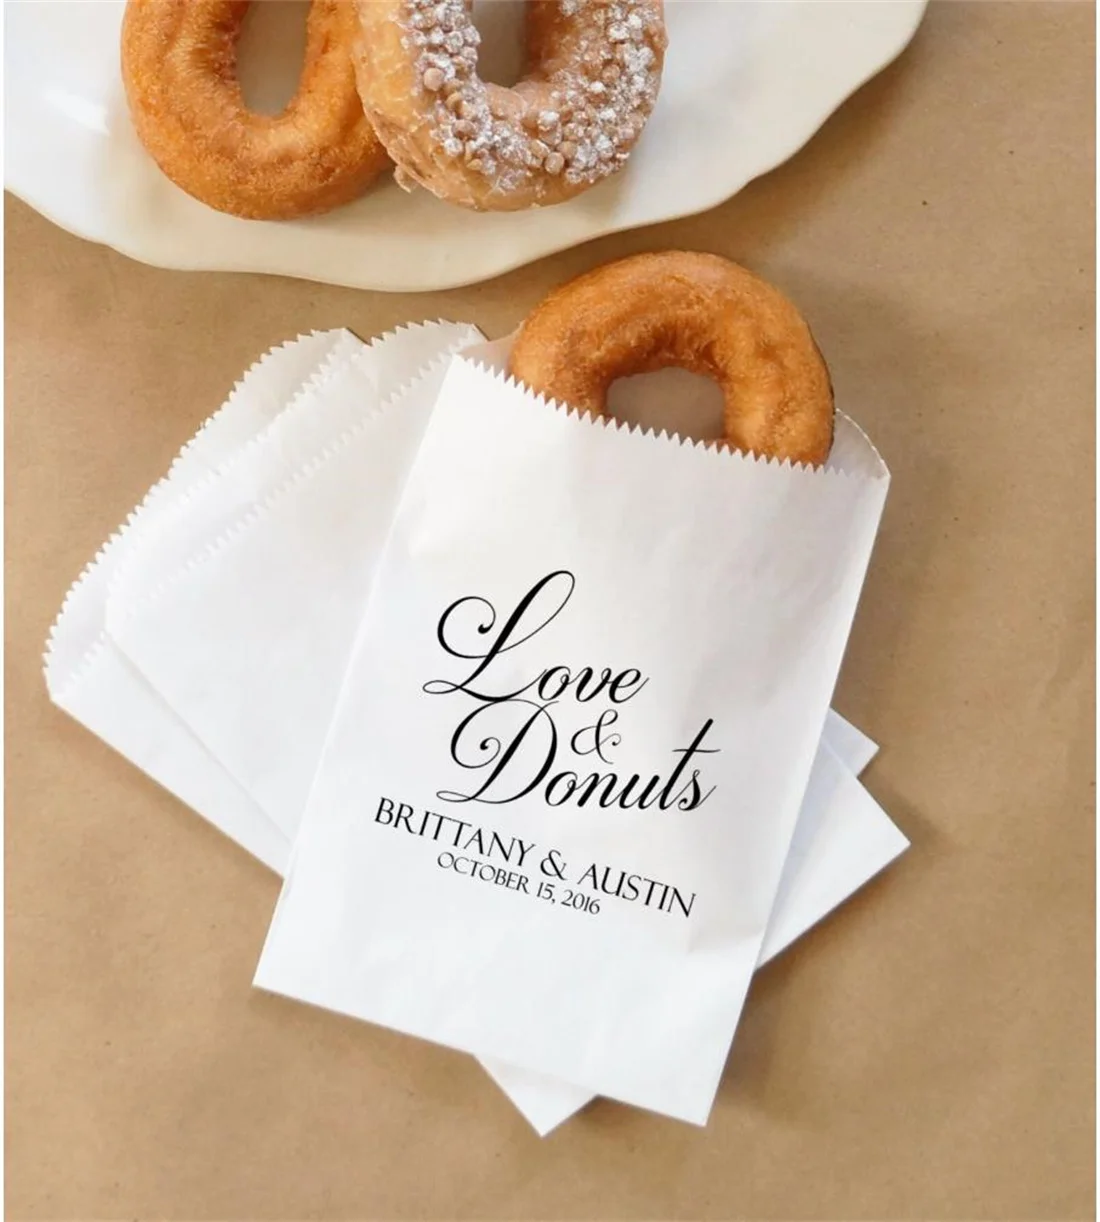 

Set of 50 Wedding Donut Bags, Fall Wedding Doughnuts, Barn Wedding, Cider and Donuts, Dessert Table - Personalized - Lined, Grea